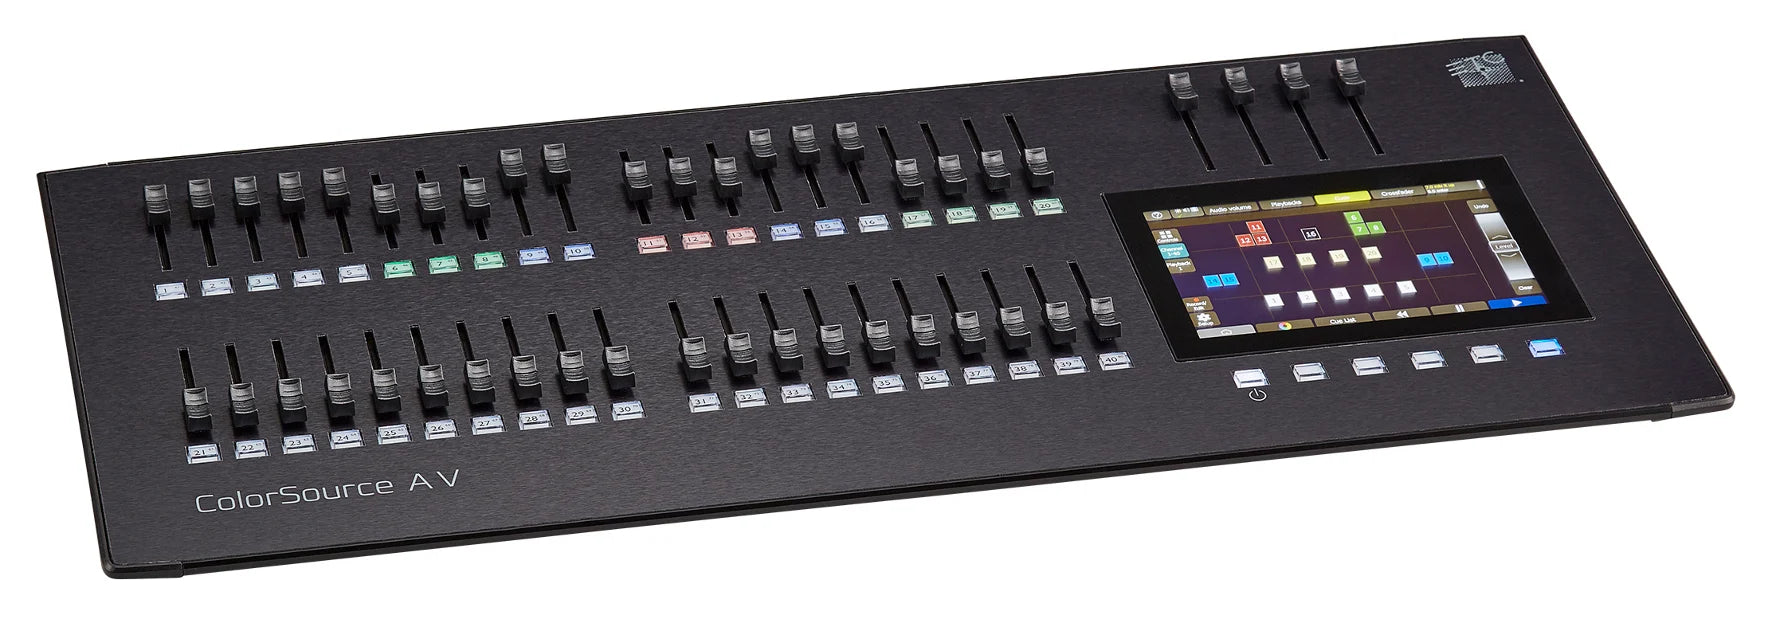 ETC ColorSource 40 AV DMX Control Console for 80 Fixtures with 40 Faders, HDMI and Audio Output